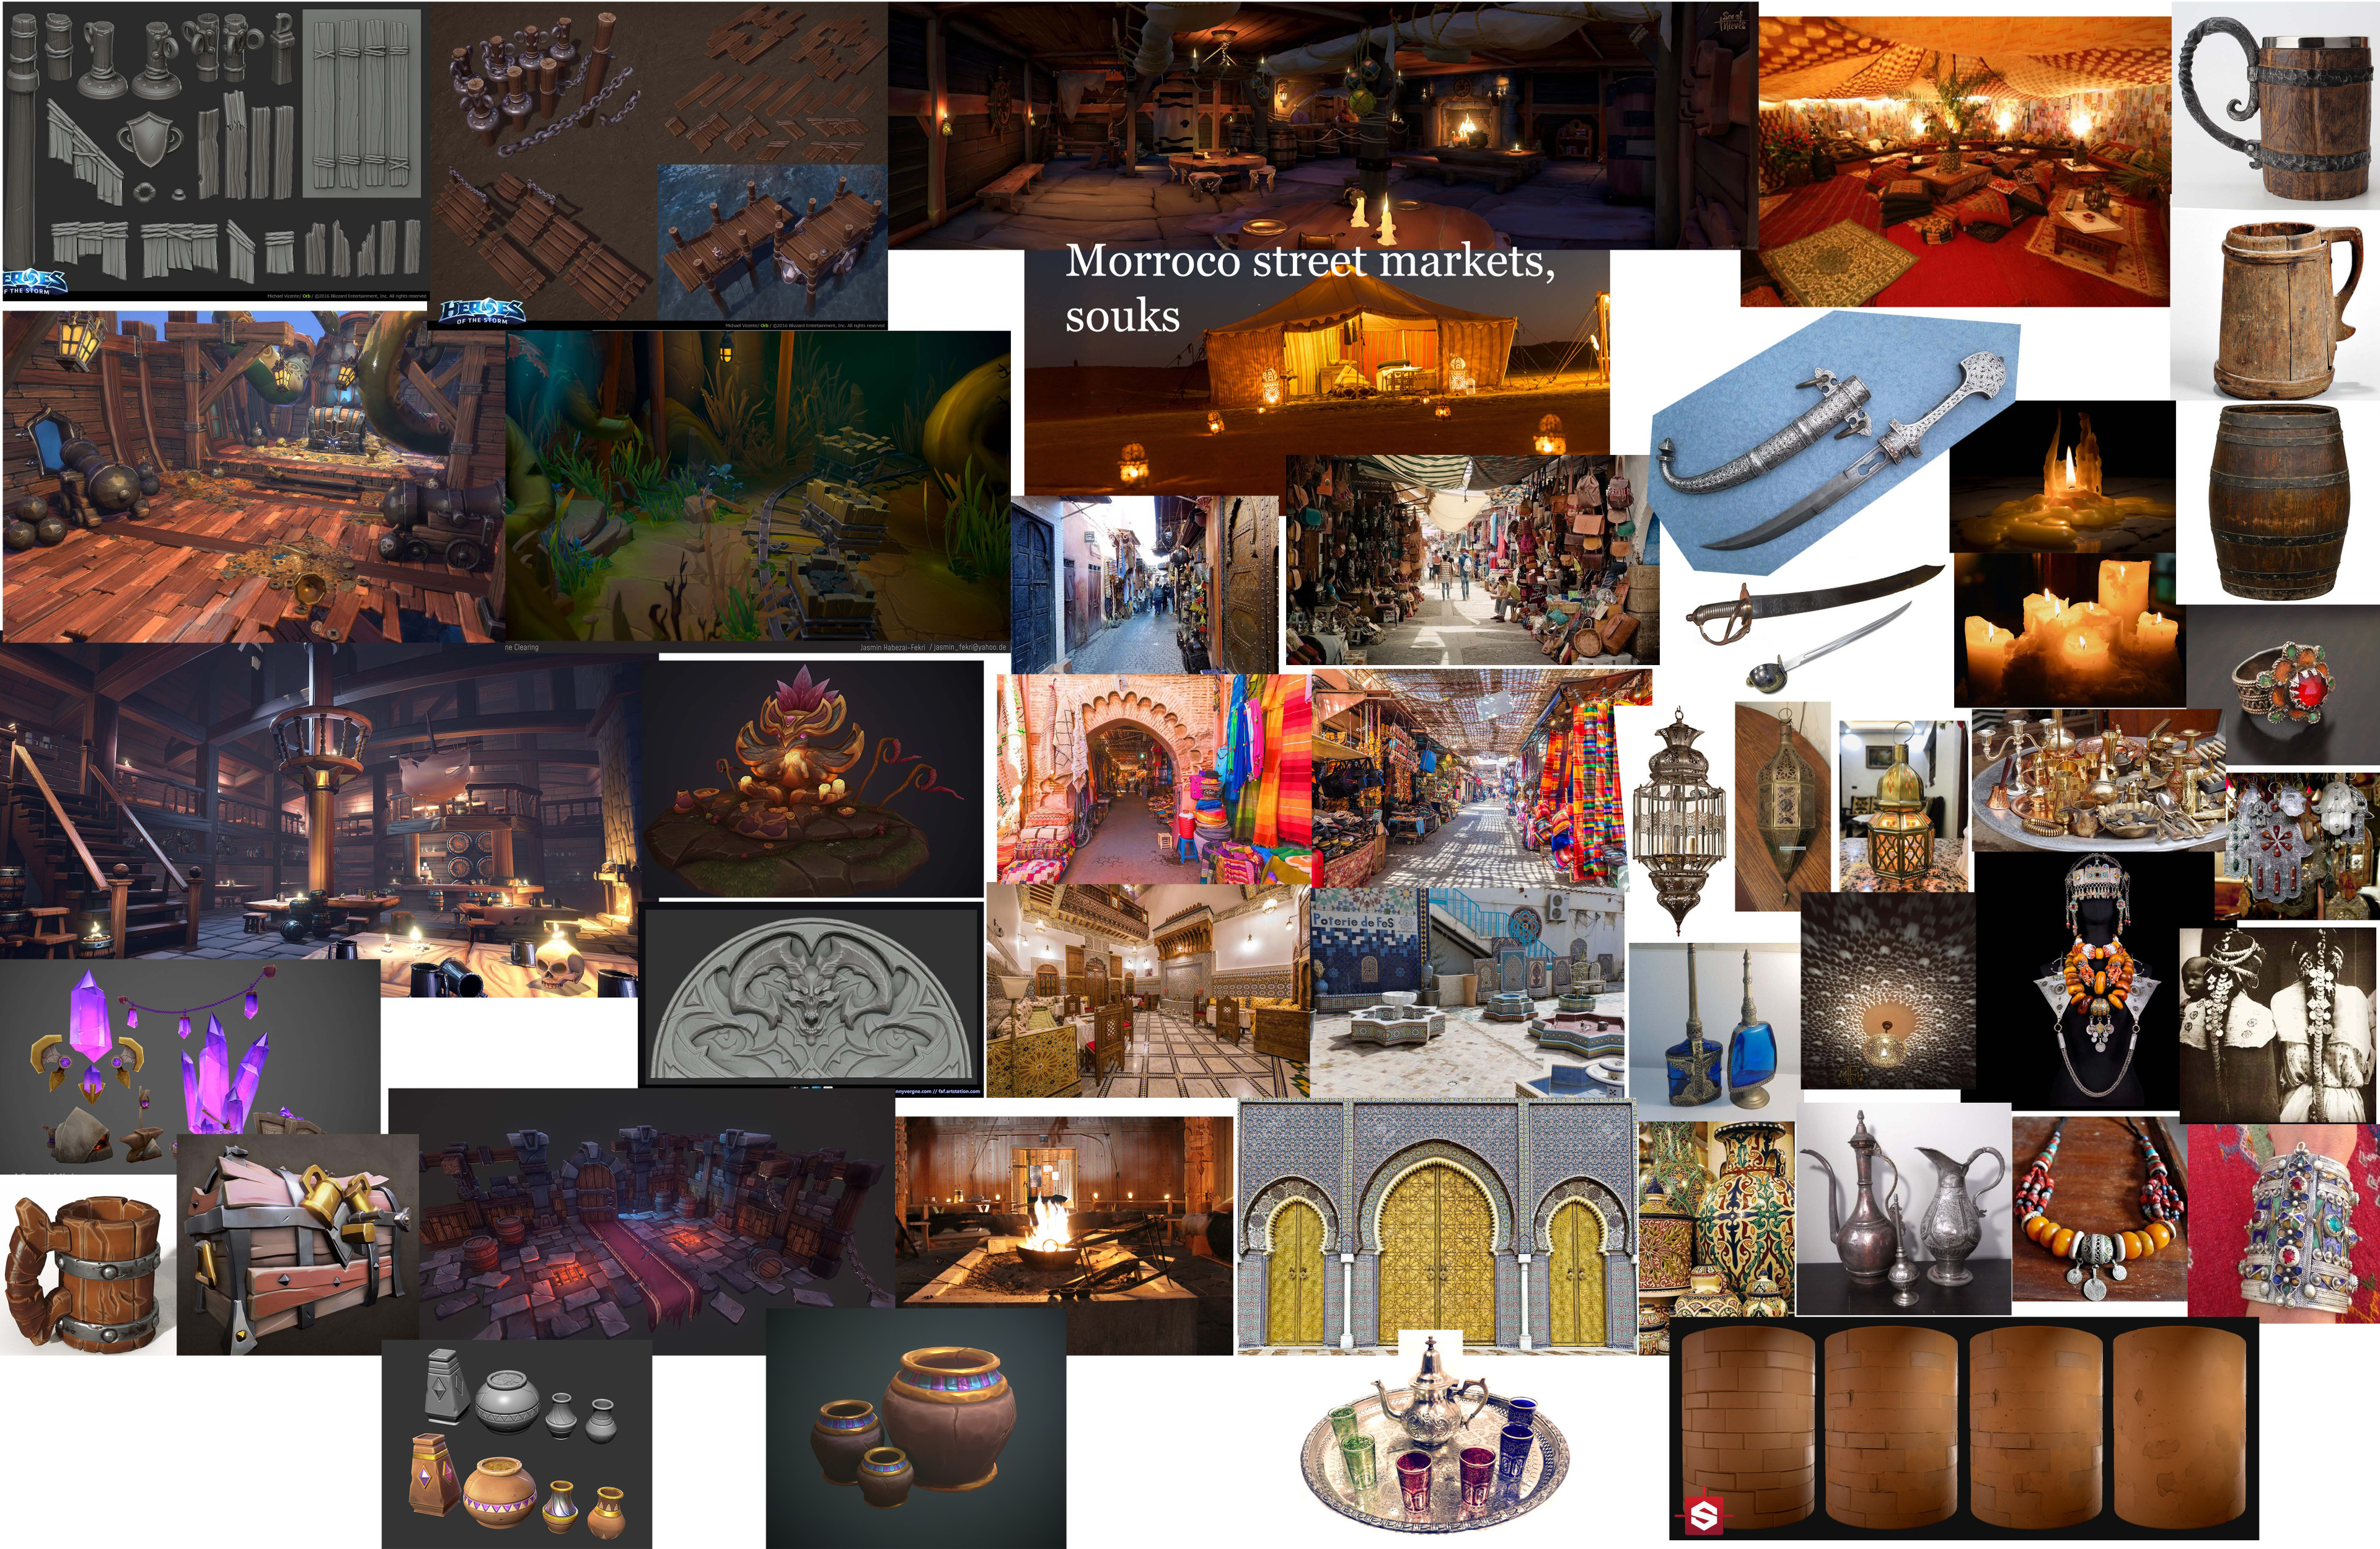 My mood board, filled with inspiring stylized 3D art and plenty of photos to reference.